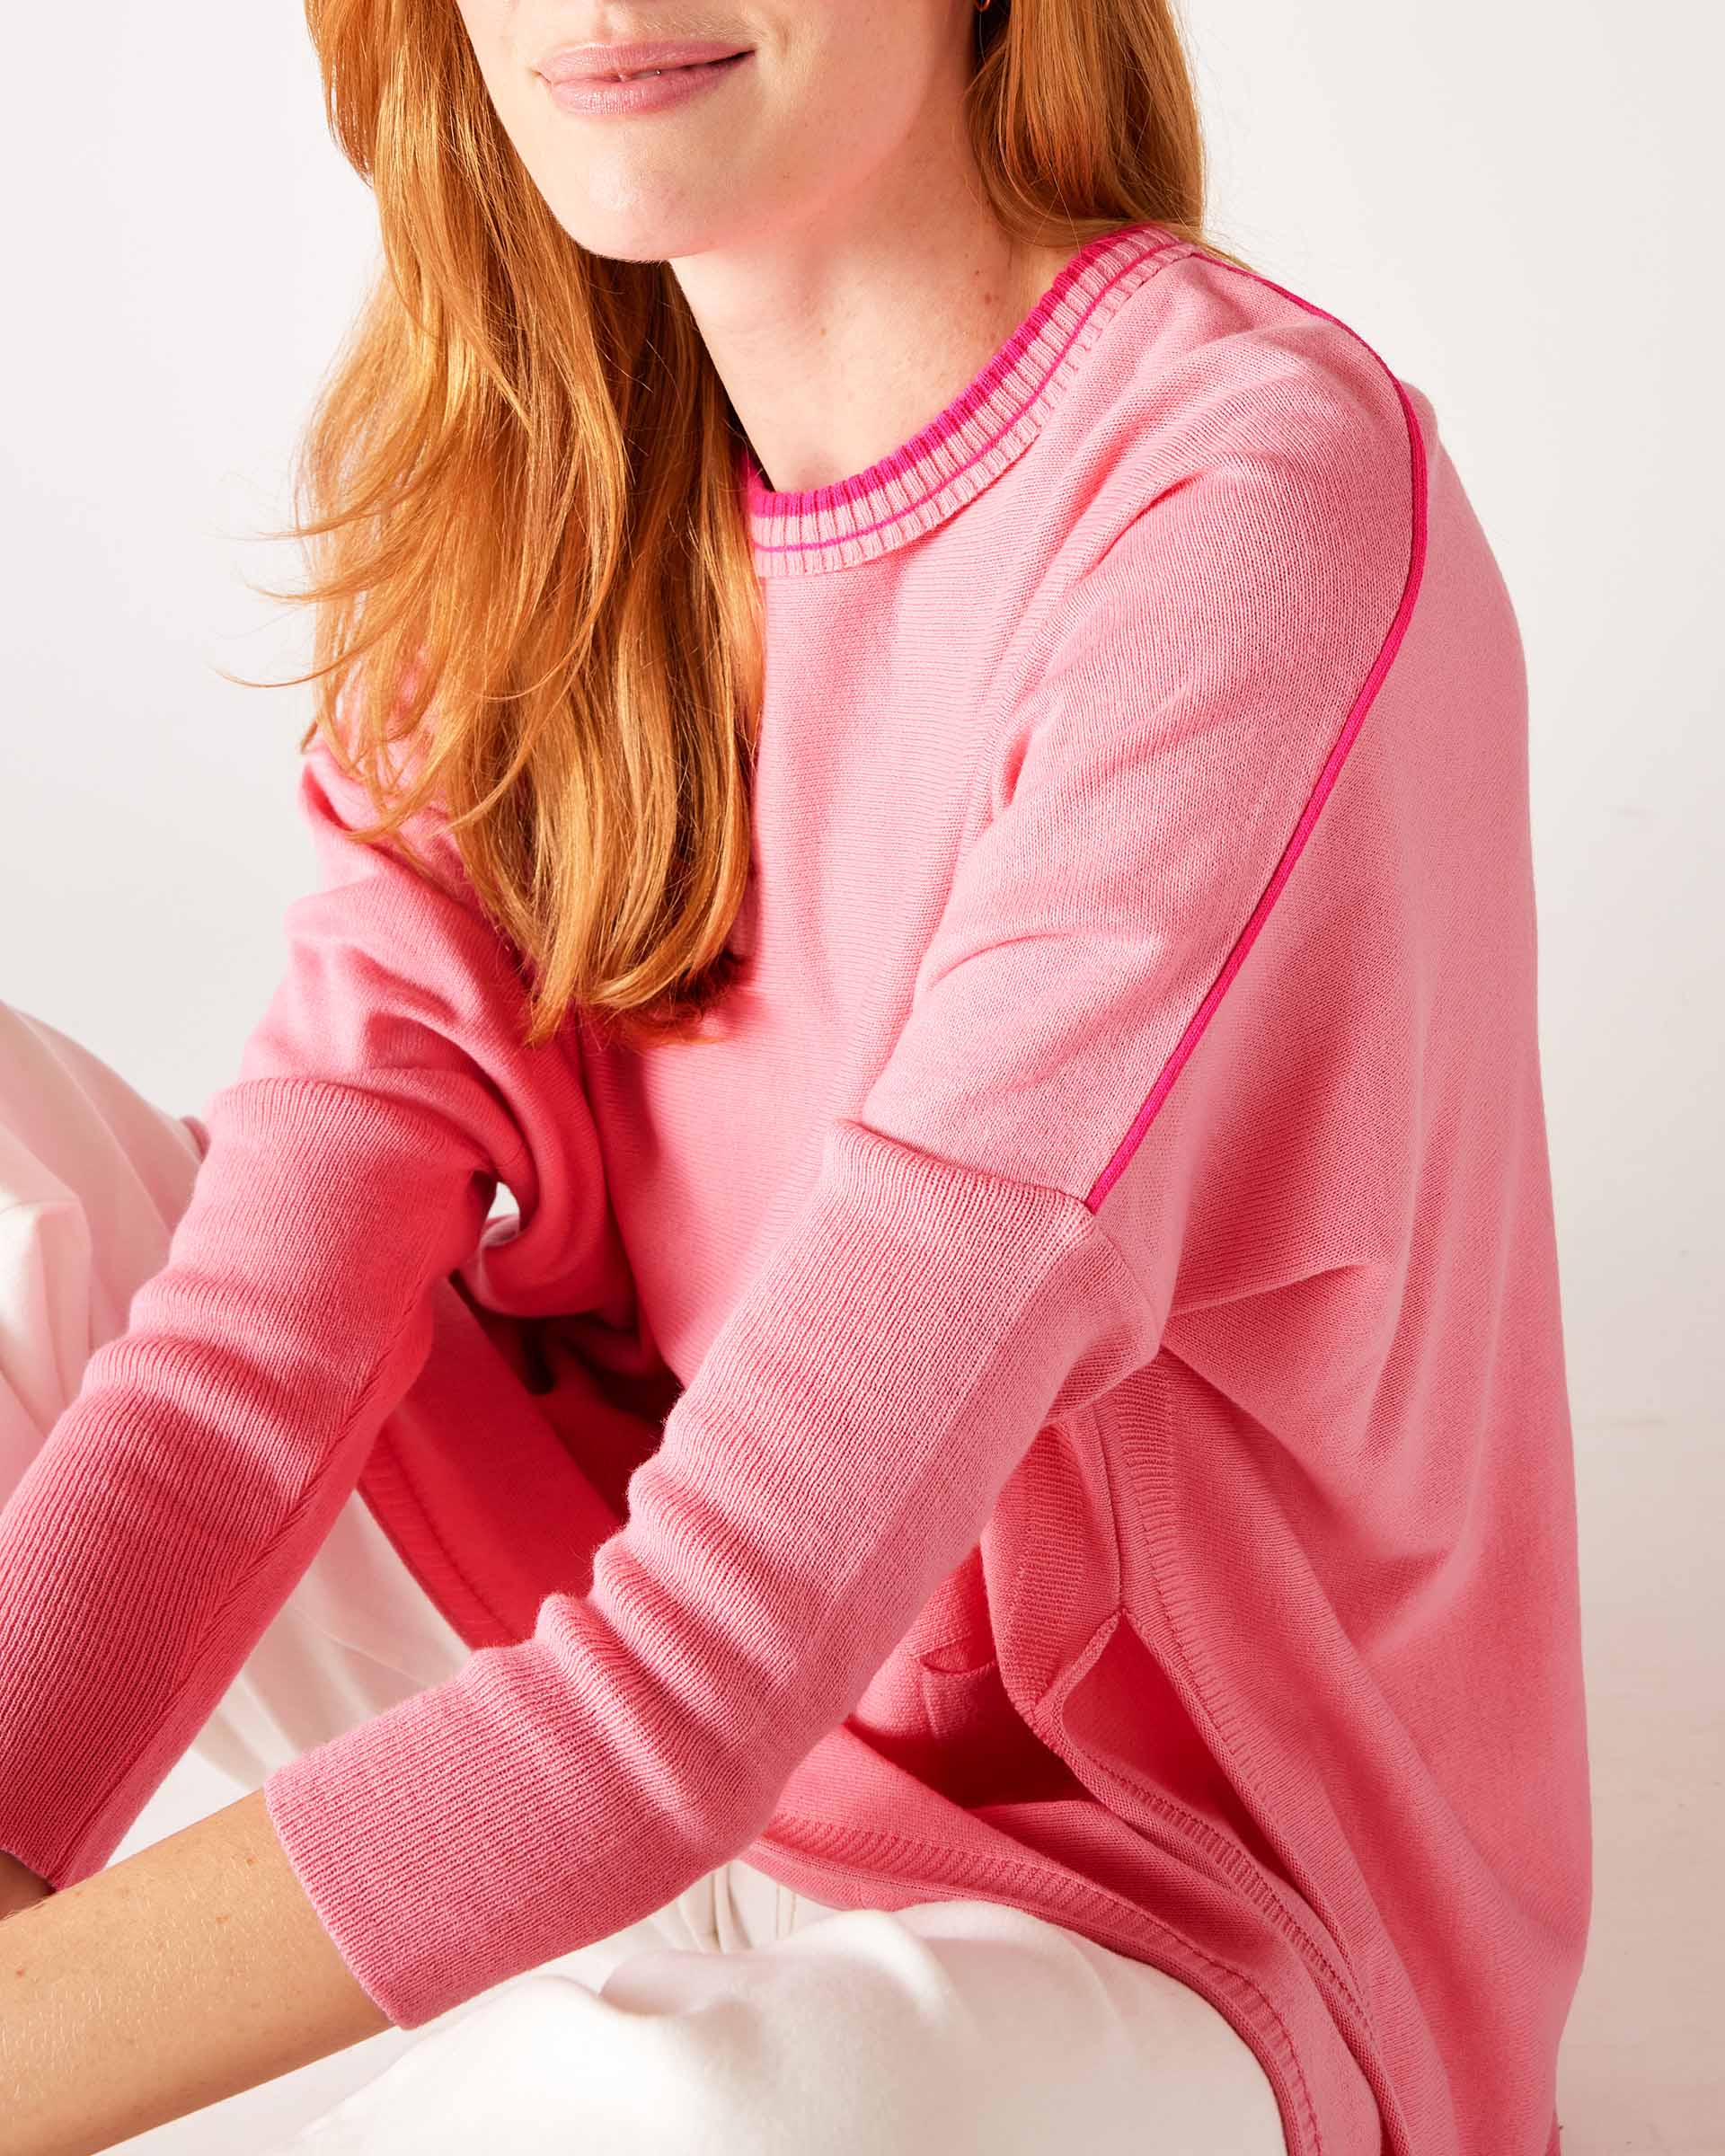 Women's Oversized Crewneck Knit Sweater in Pink Contrast Shoulder View